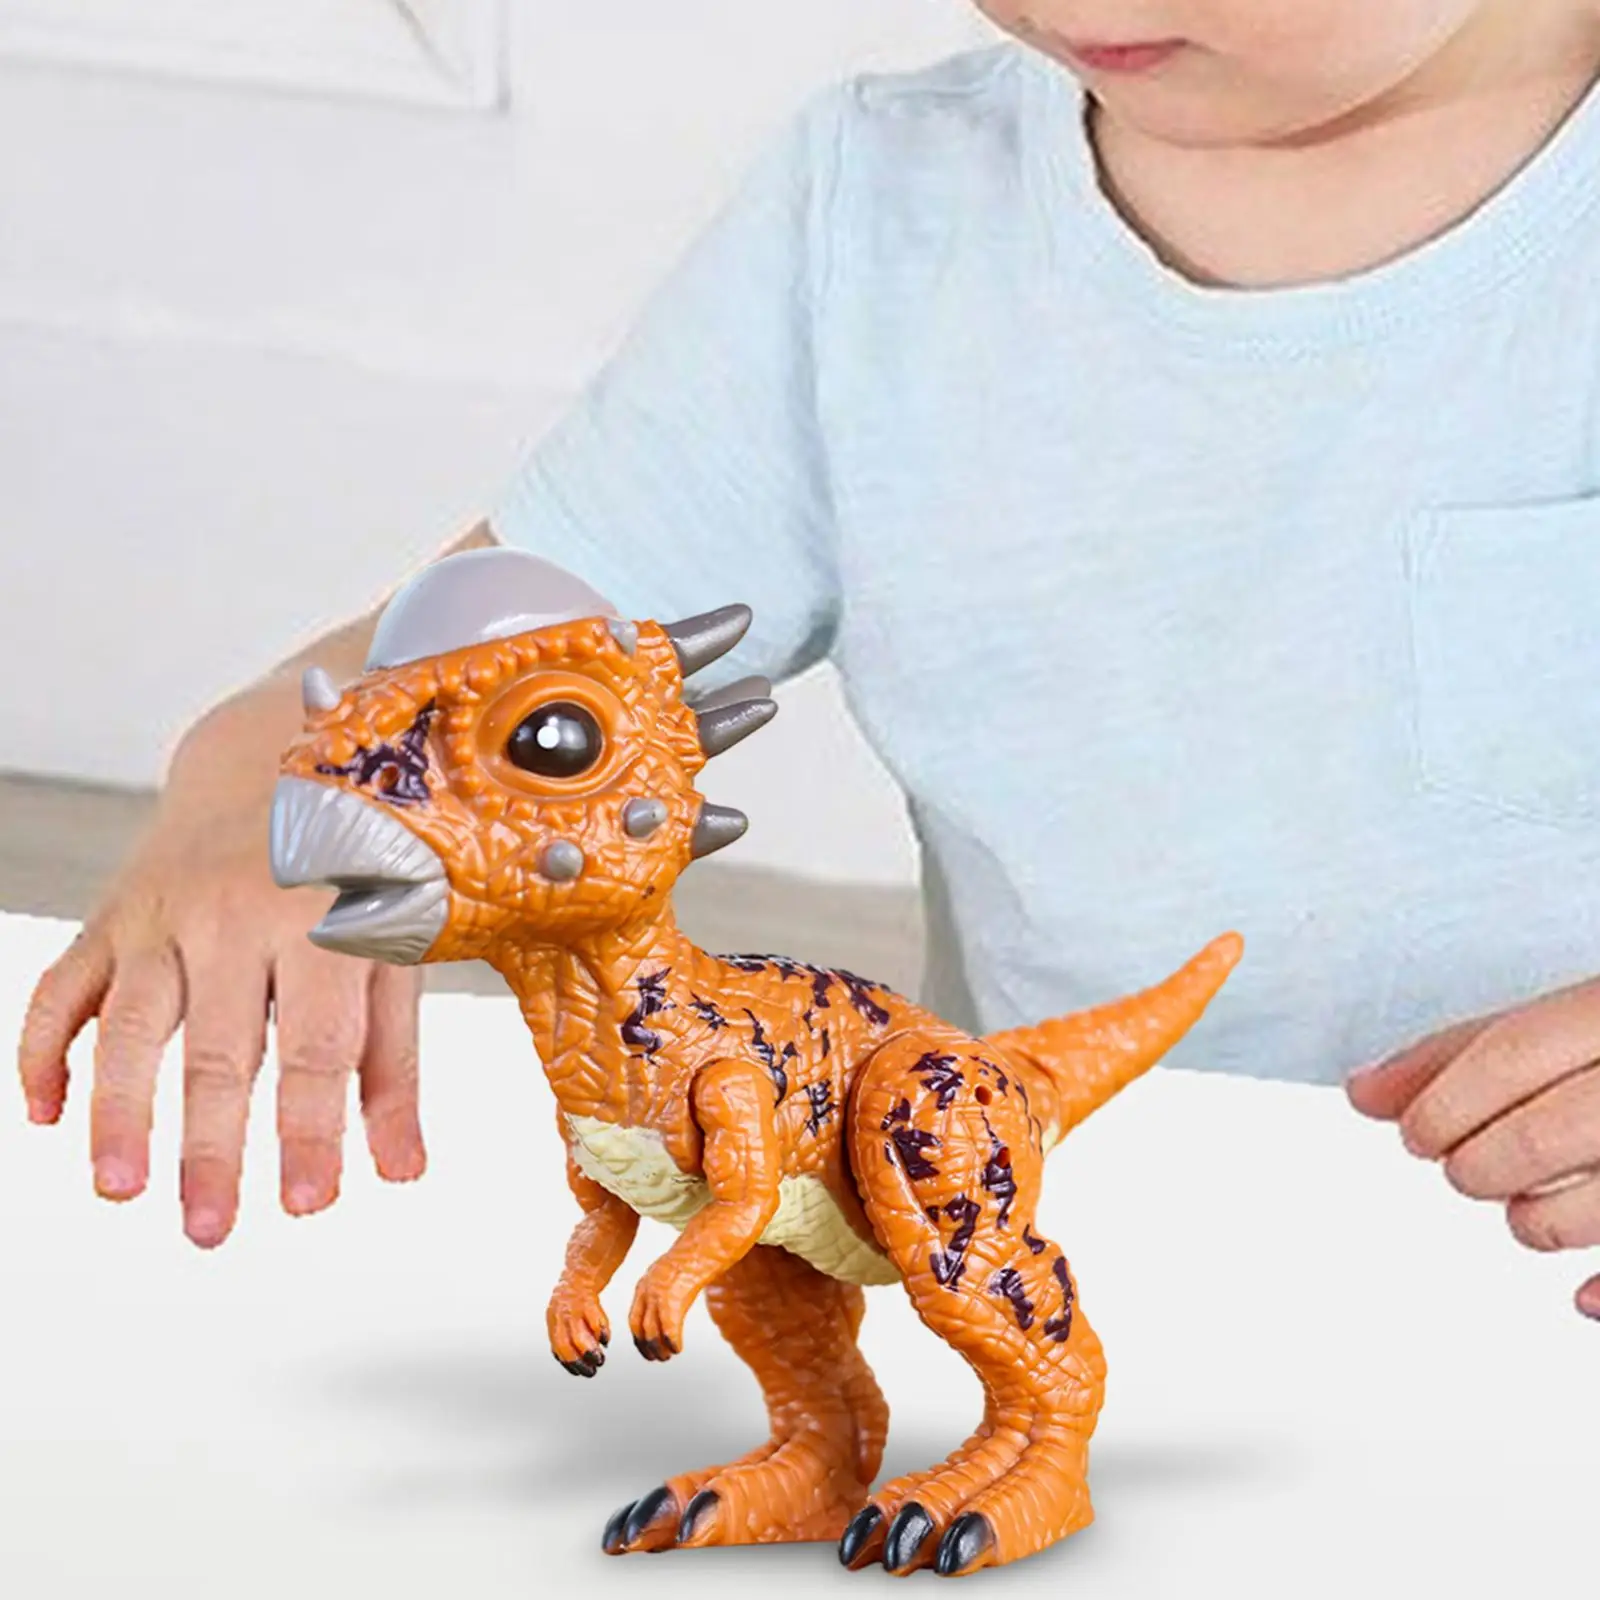 Dinosaur Figure Toy Simulated Dinosaur Toy Collections Realistic Animal Figurine Model Movable Joints for Pretend Play